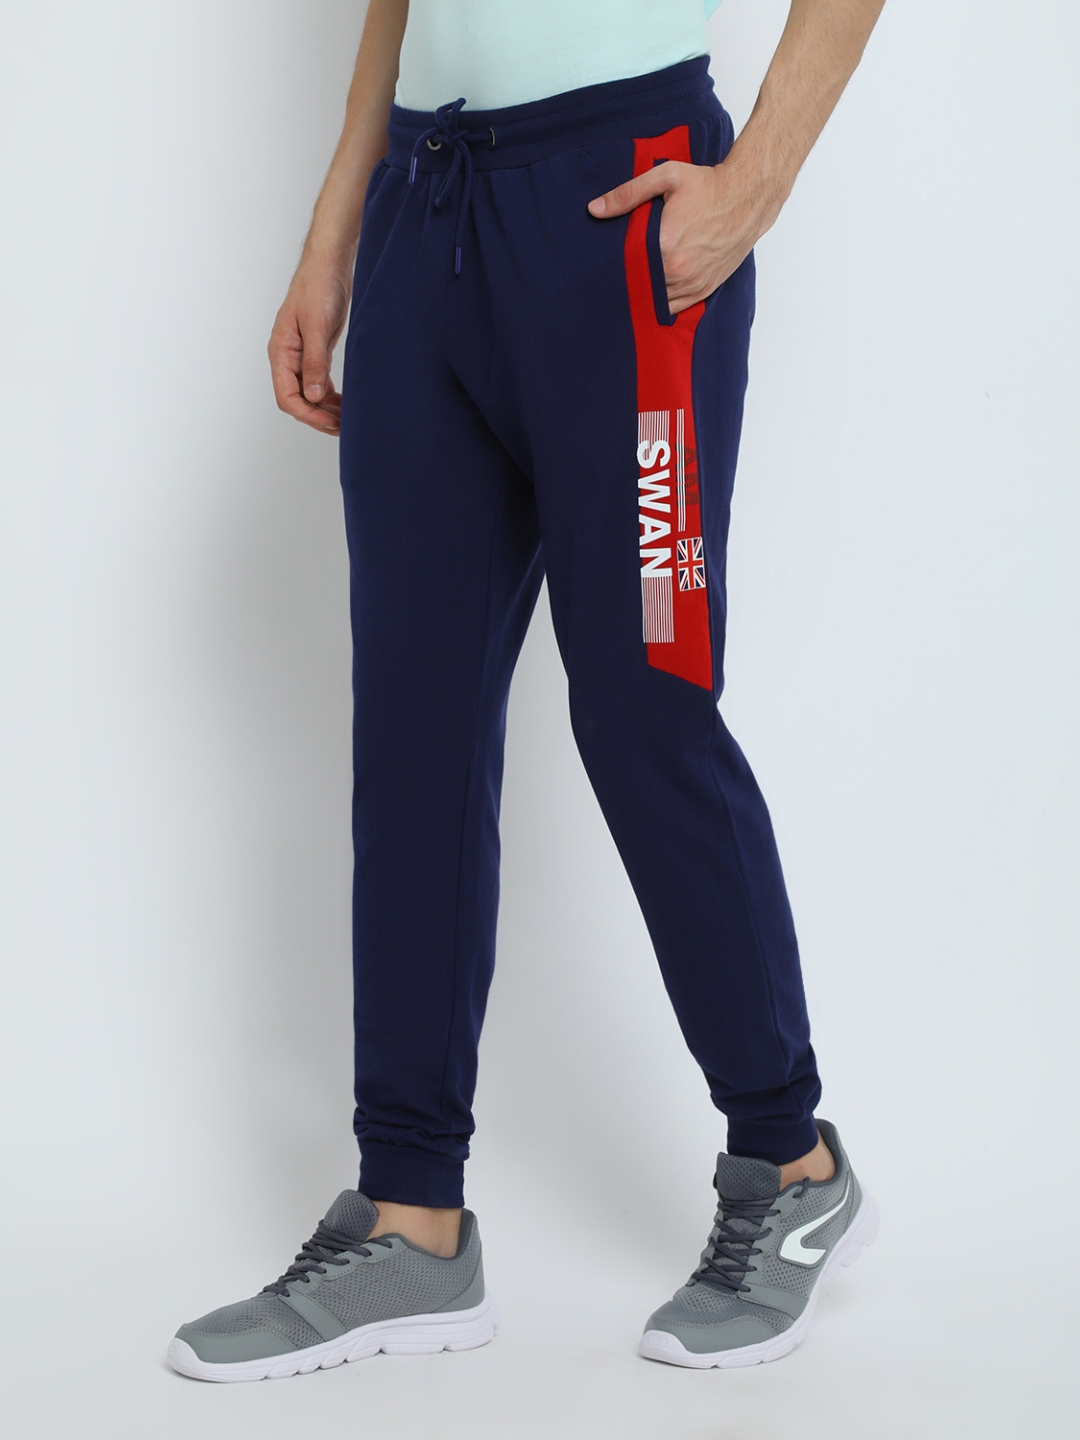 Affordable Wholesale Mens Cotton Lycra Pants For Trendsetting Looks 